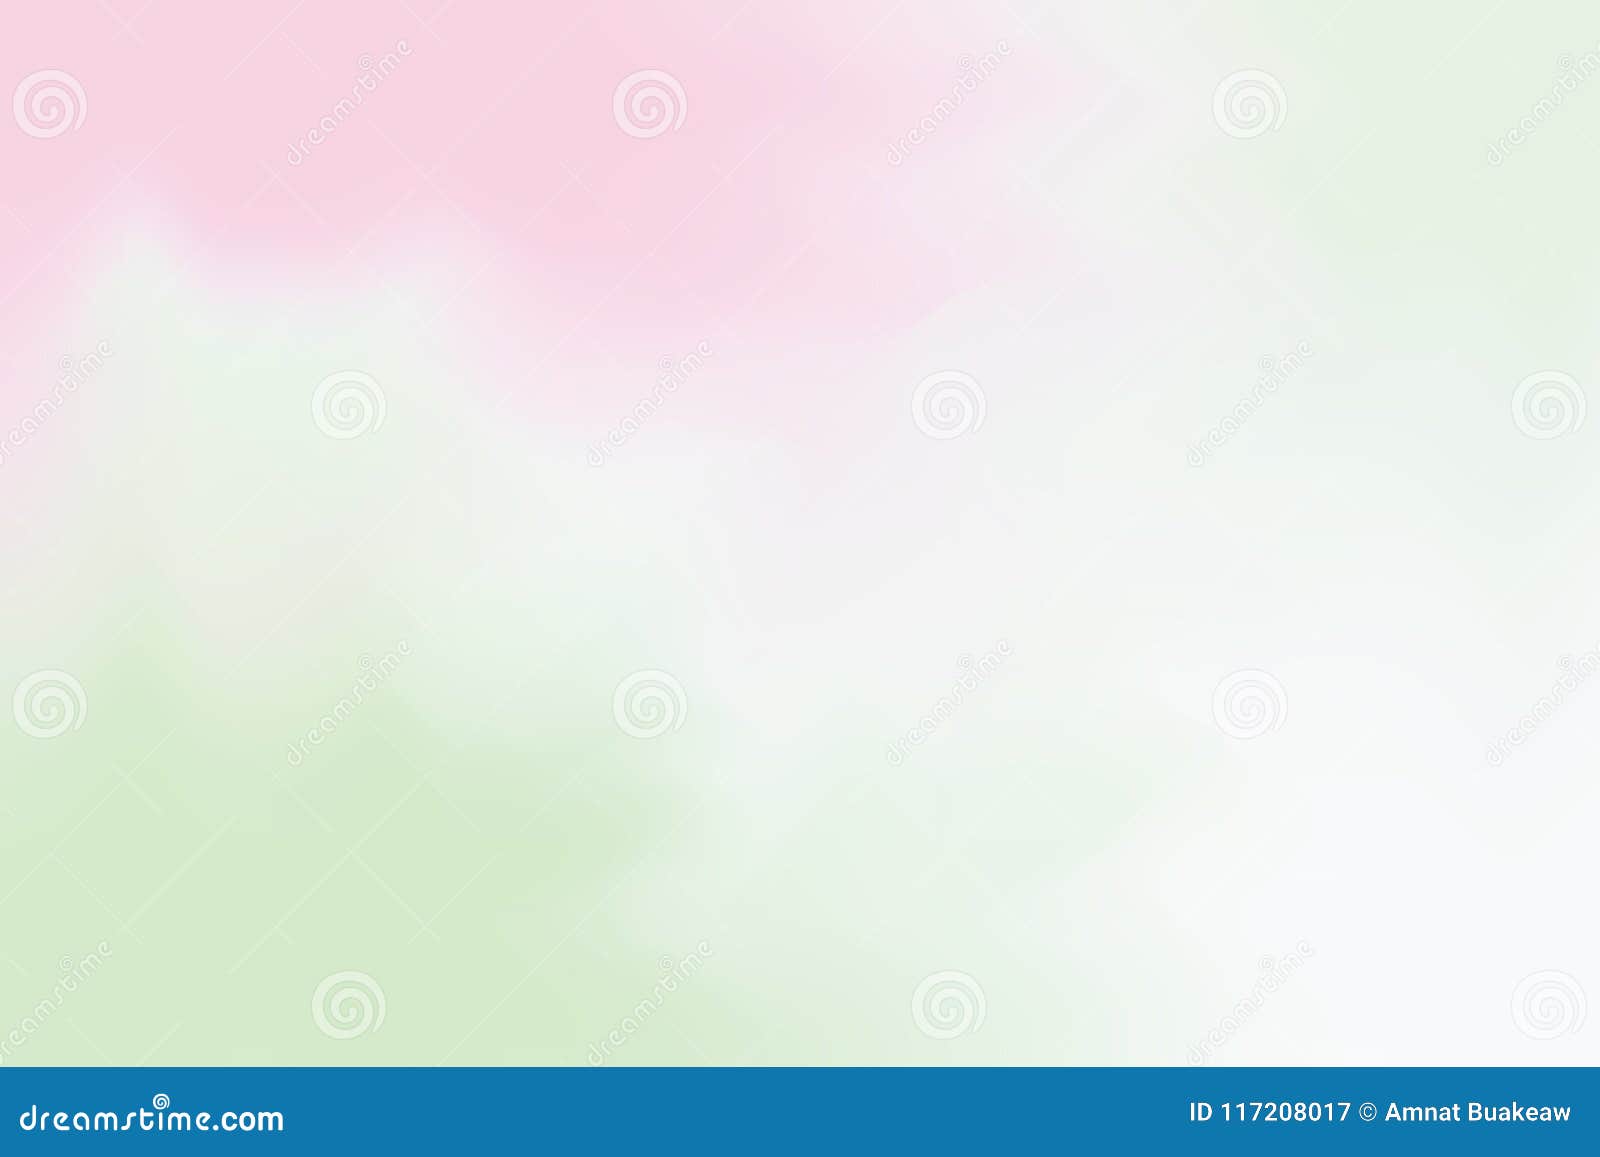 Green Soft Mixed Background Painting Art Pastel Abstract, Colorful Art Wallpaper Stock Illustration - Illustration of multicolor, 117208017